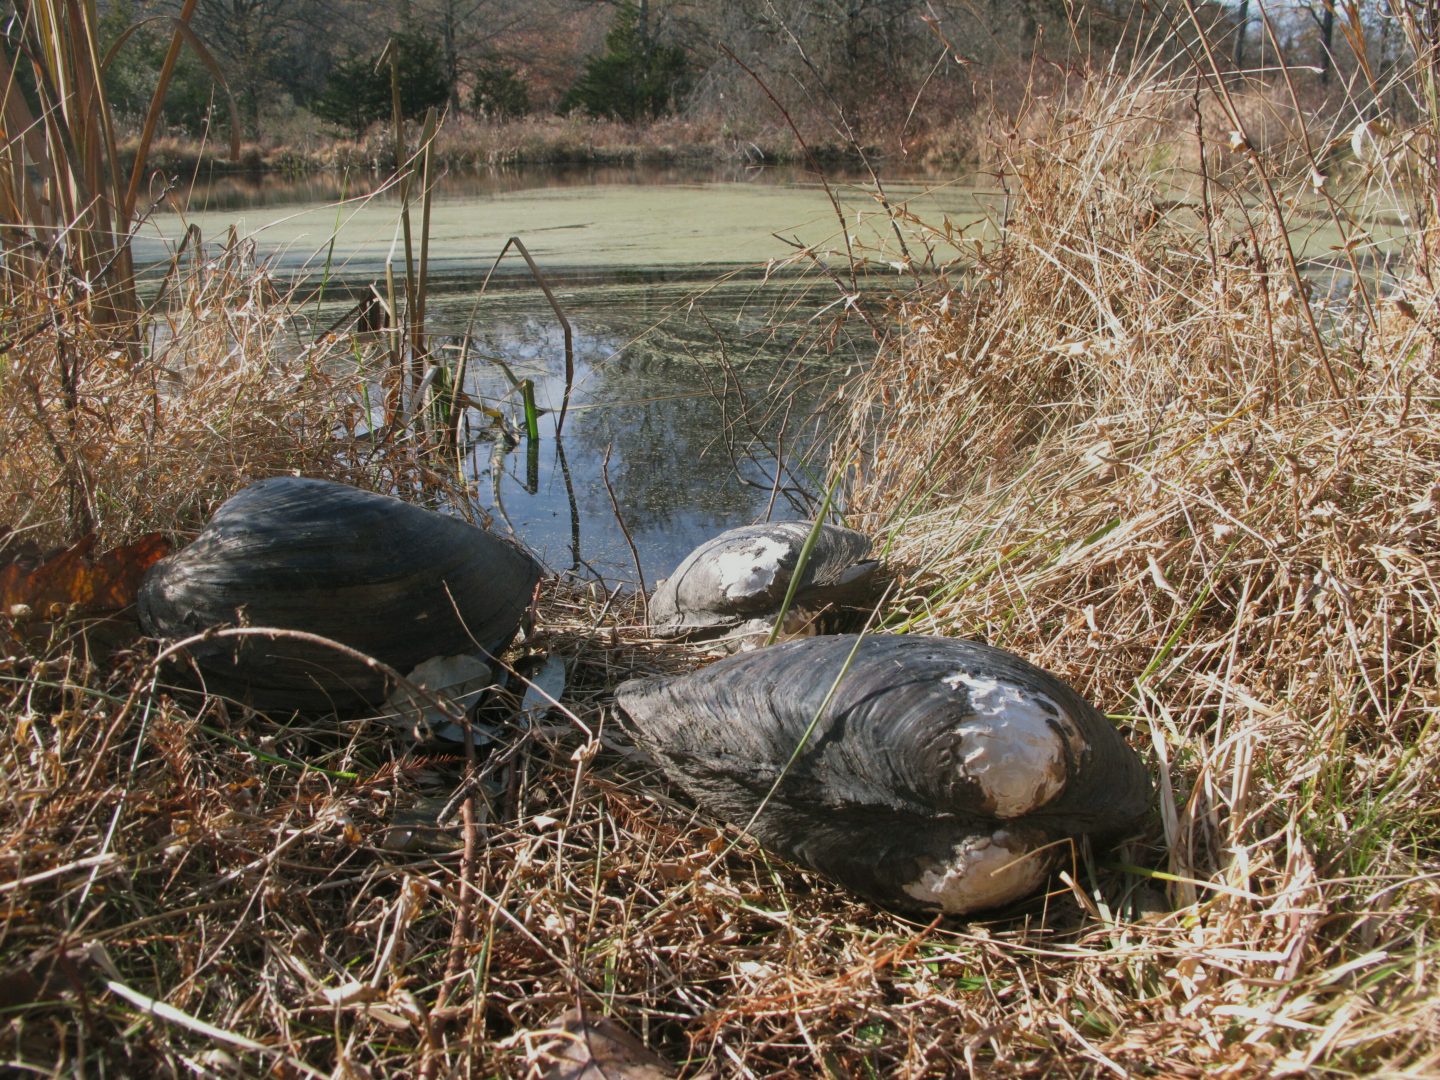 This Nov. 21, 2019 photo shows dead Chinese pond mussels that were found in a network of ponds in Franklin Township, N.J.  A colony of giant invasive Chinese mussels has been wiped out from the New Jersey pond. They had threatened to spread to the Delaware River and wreak ecological havoc, as they already are doing in other parts of the world. Officials say they’re confident they’ve narrowly avoided a serious environmental problem by eradicating the mussels from a former fish farm in Hunterdon County.